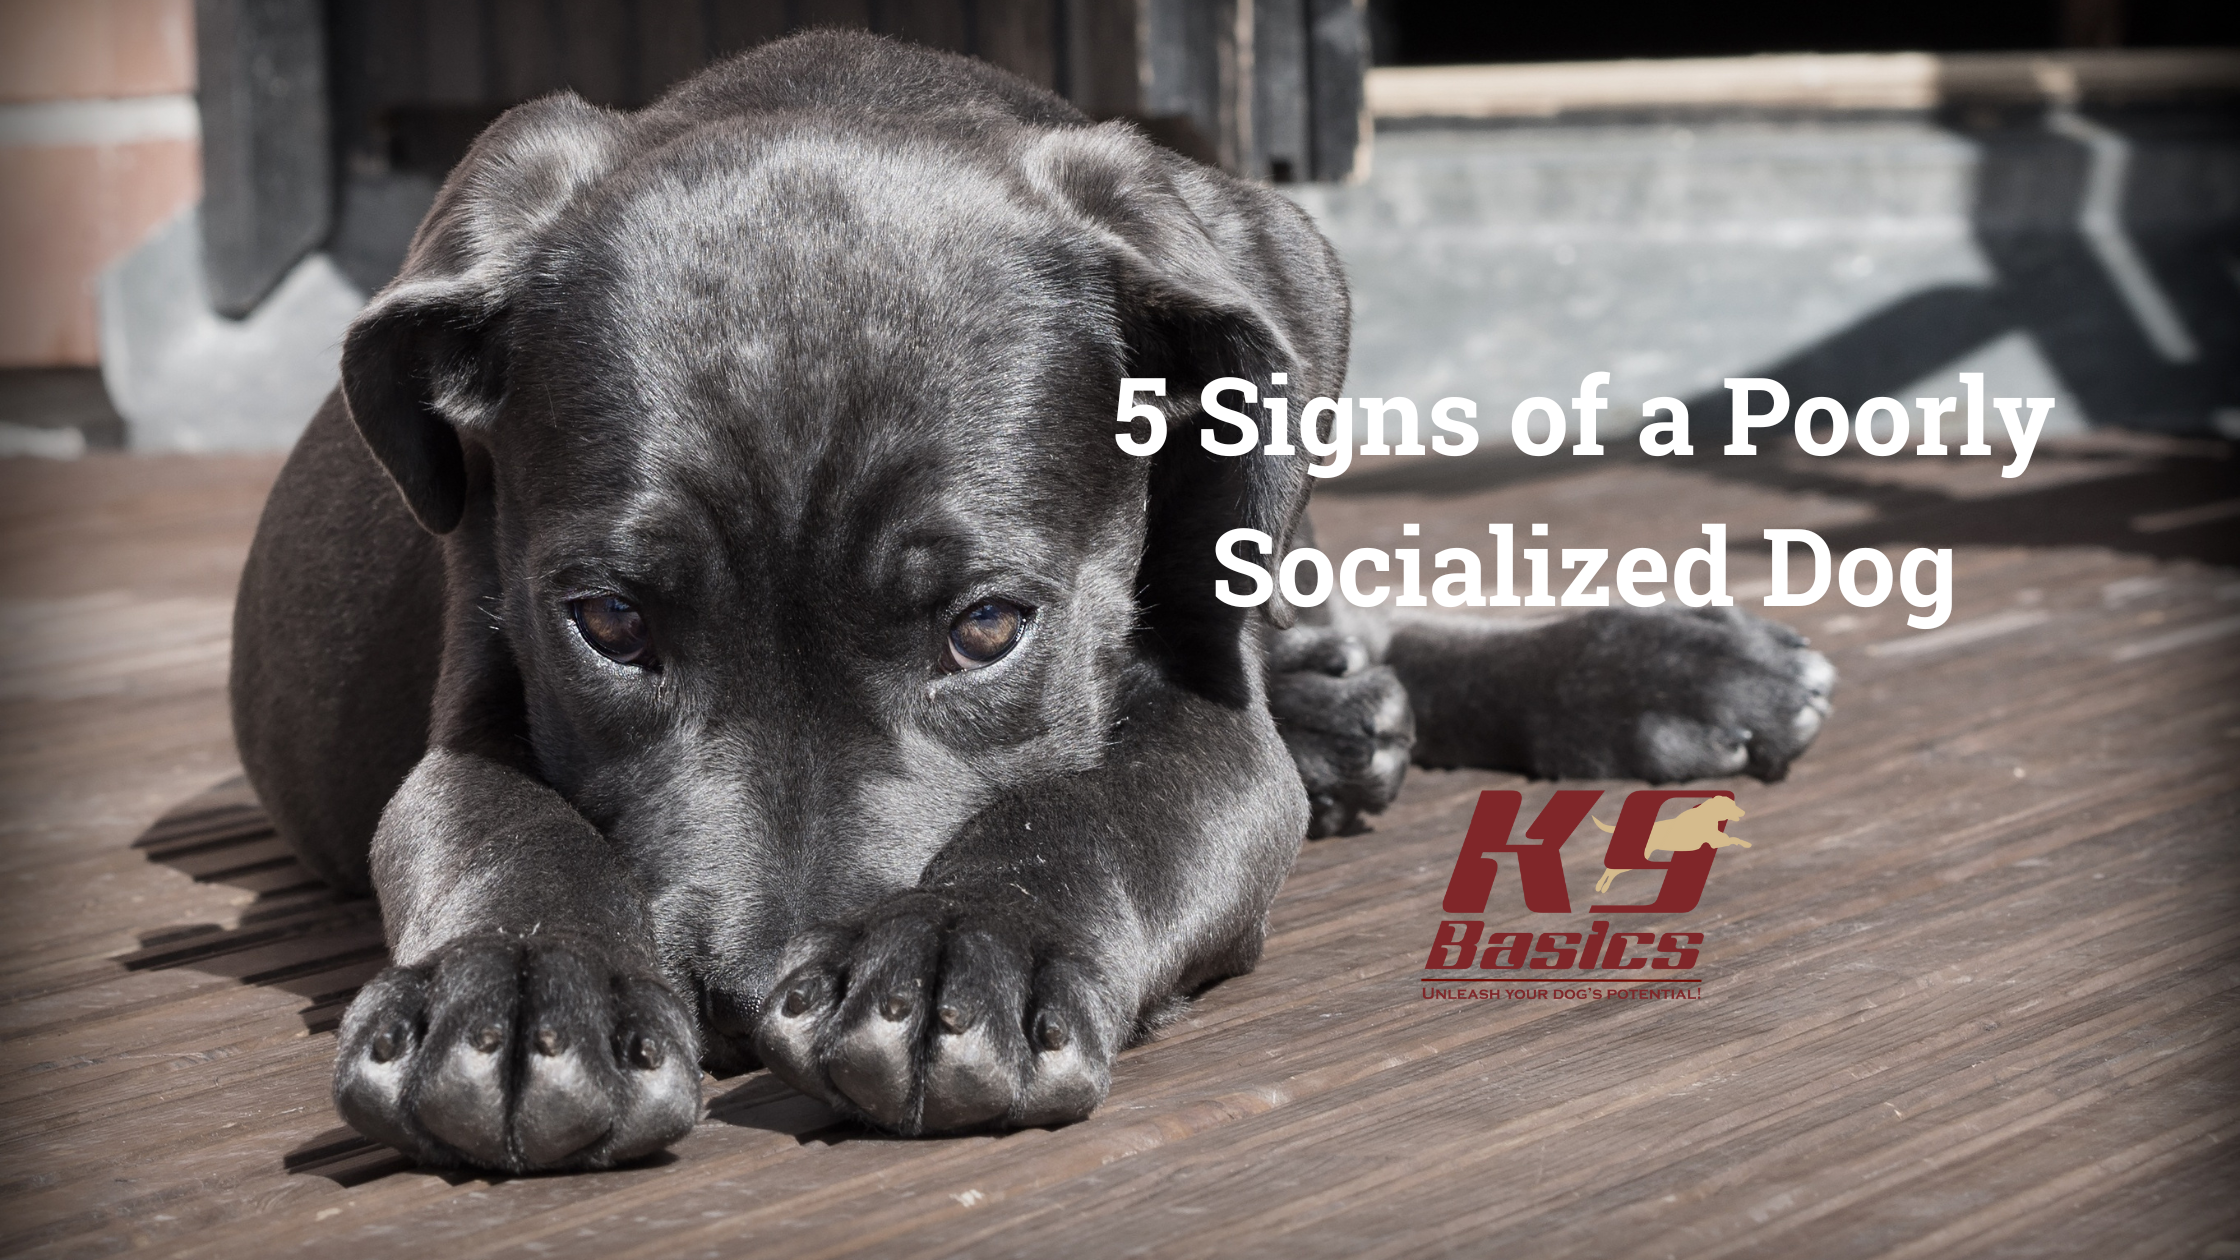 5 Signs of a Poorly Socialized Dog